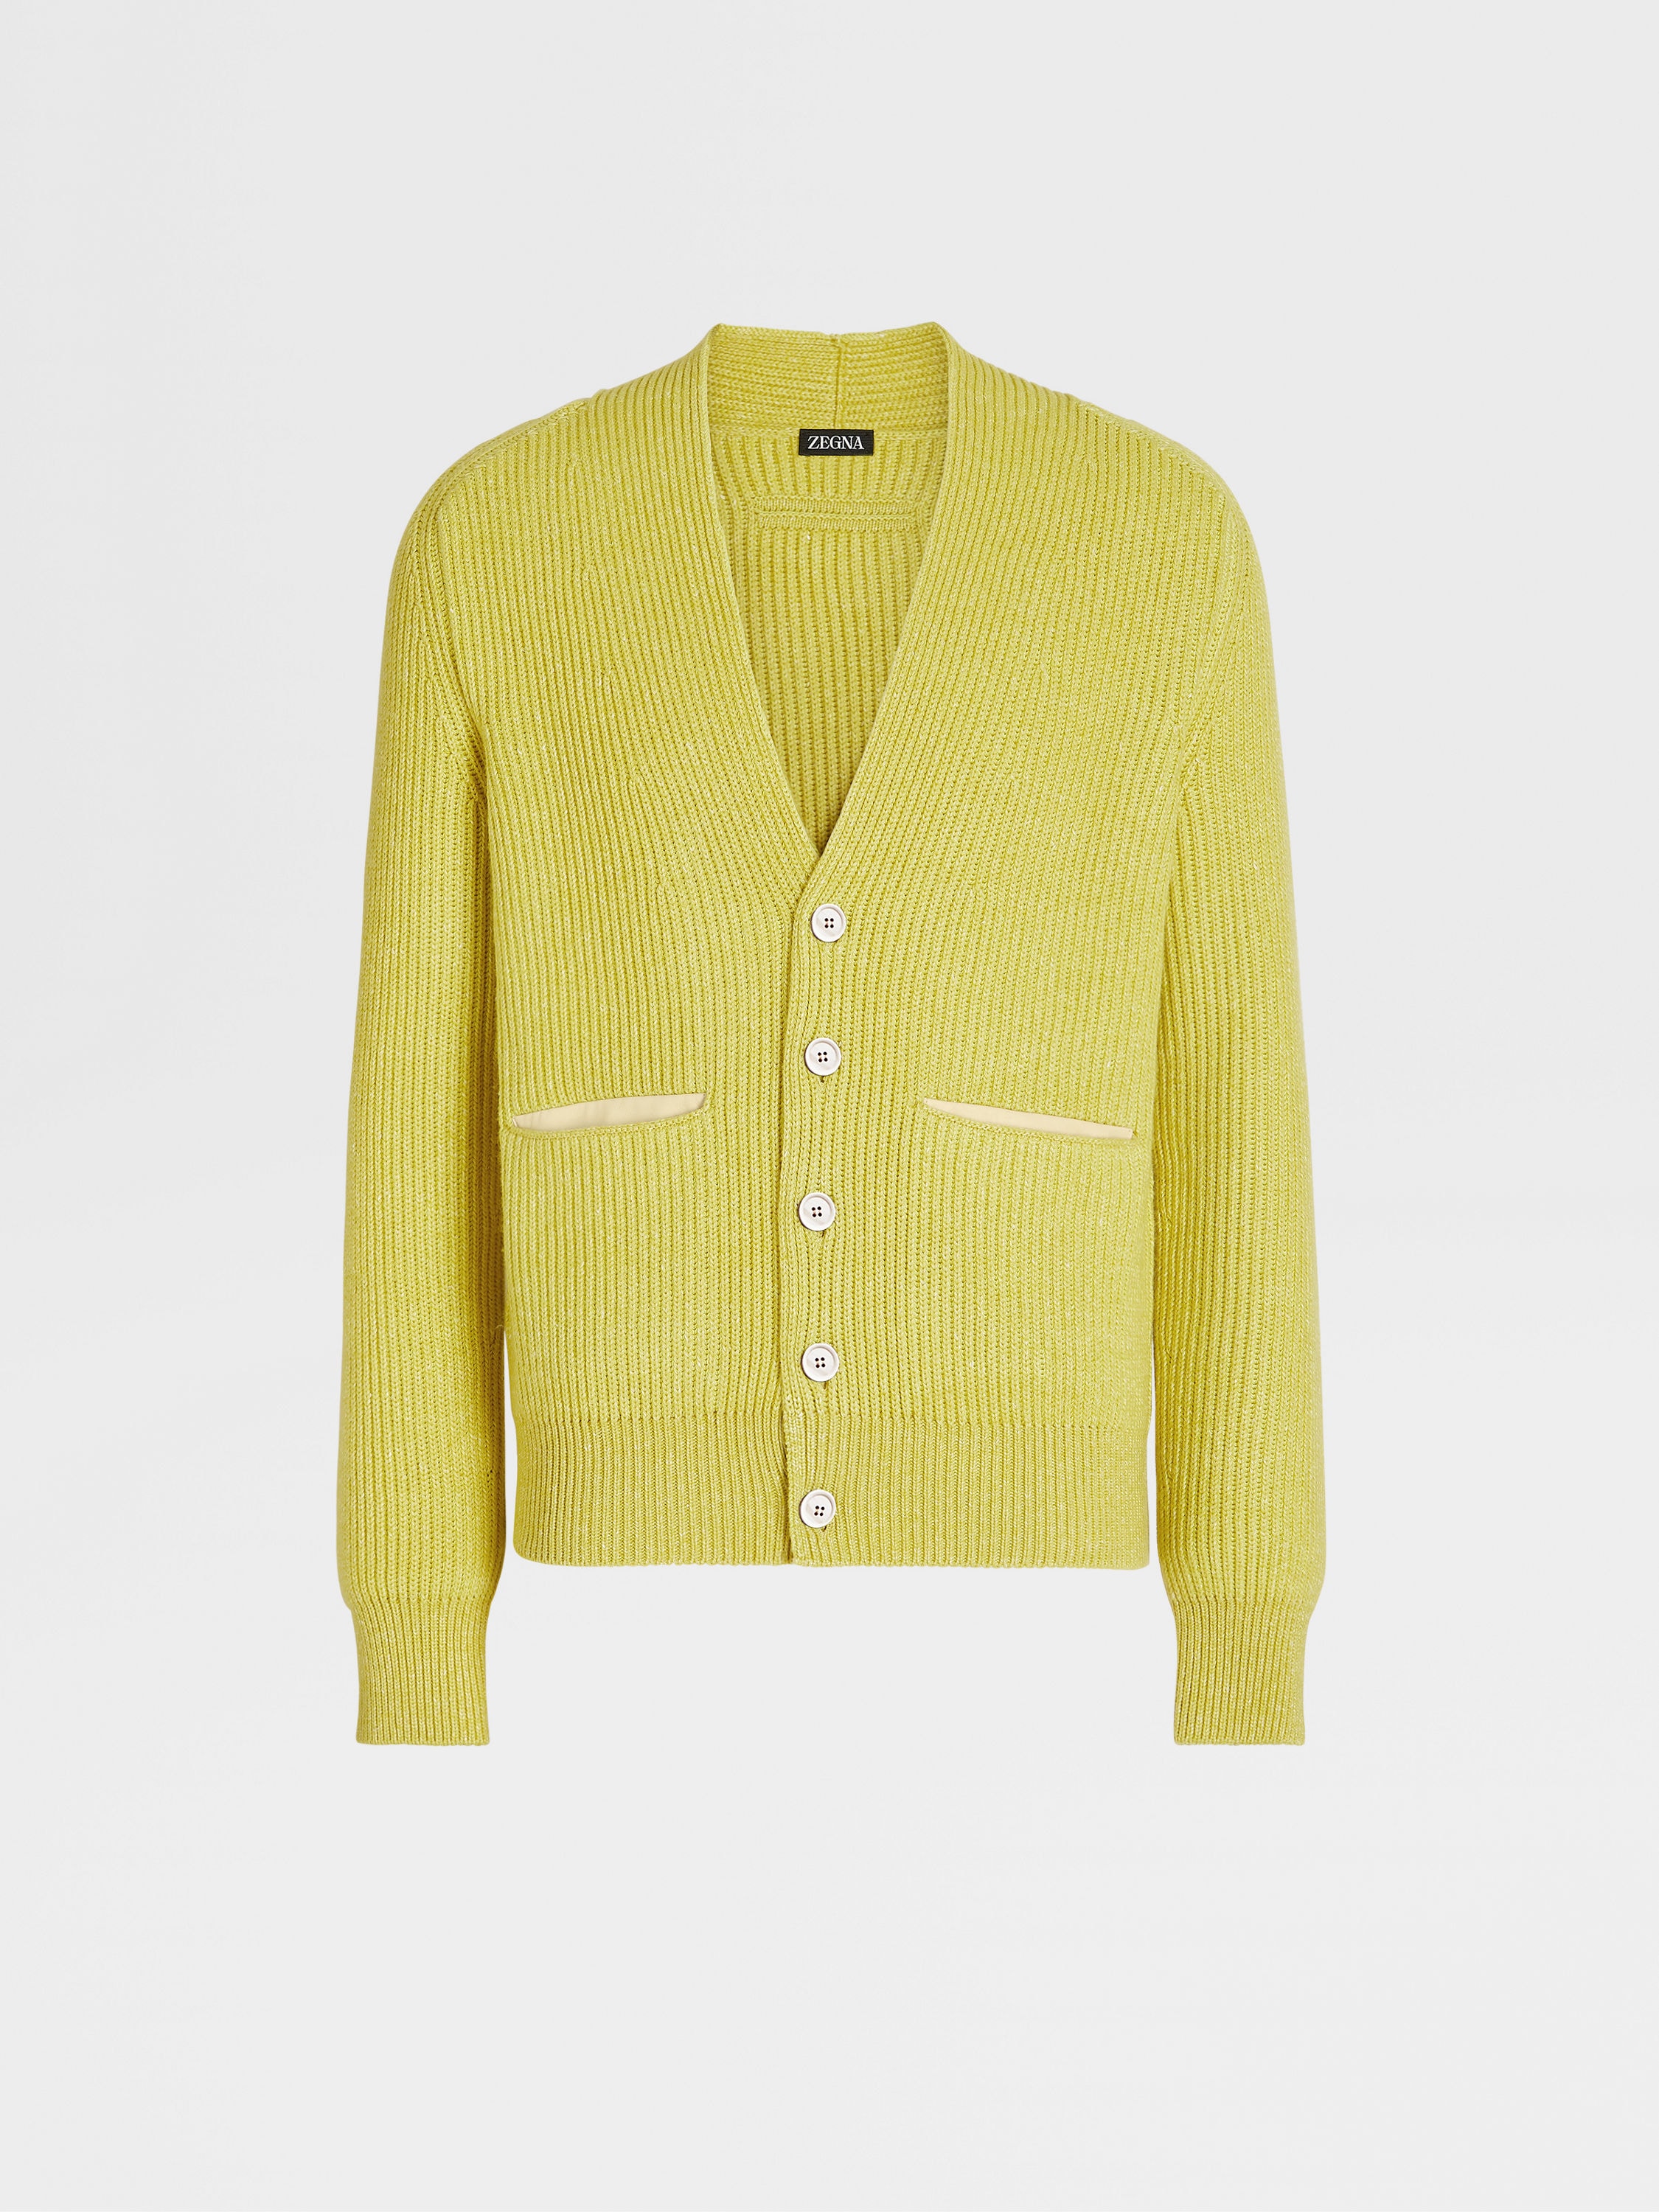 Yellow Cashmere Linen and Cotton Knit Cardigan